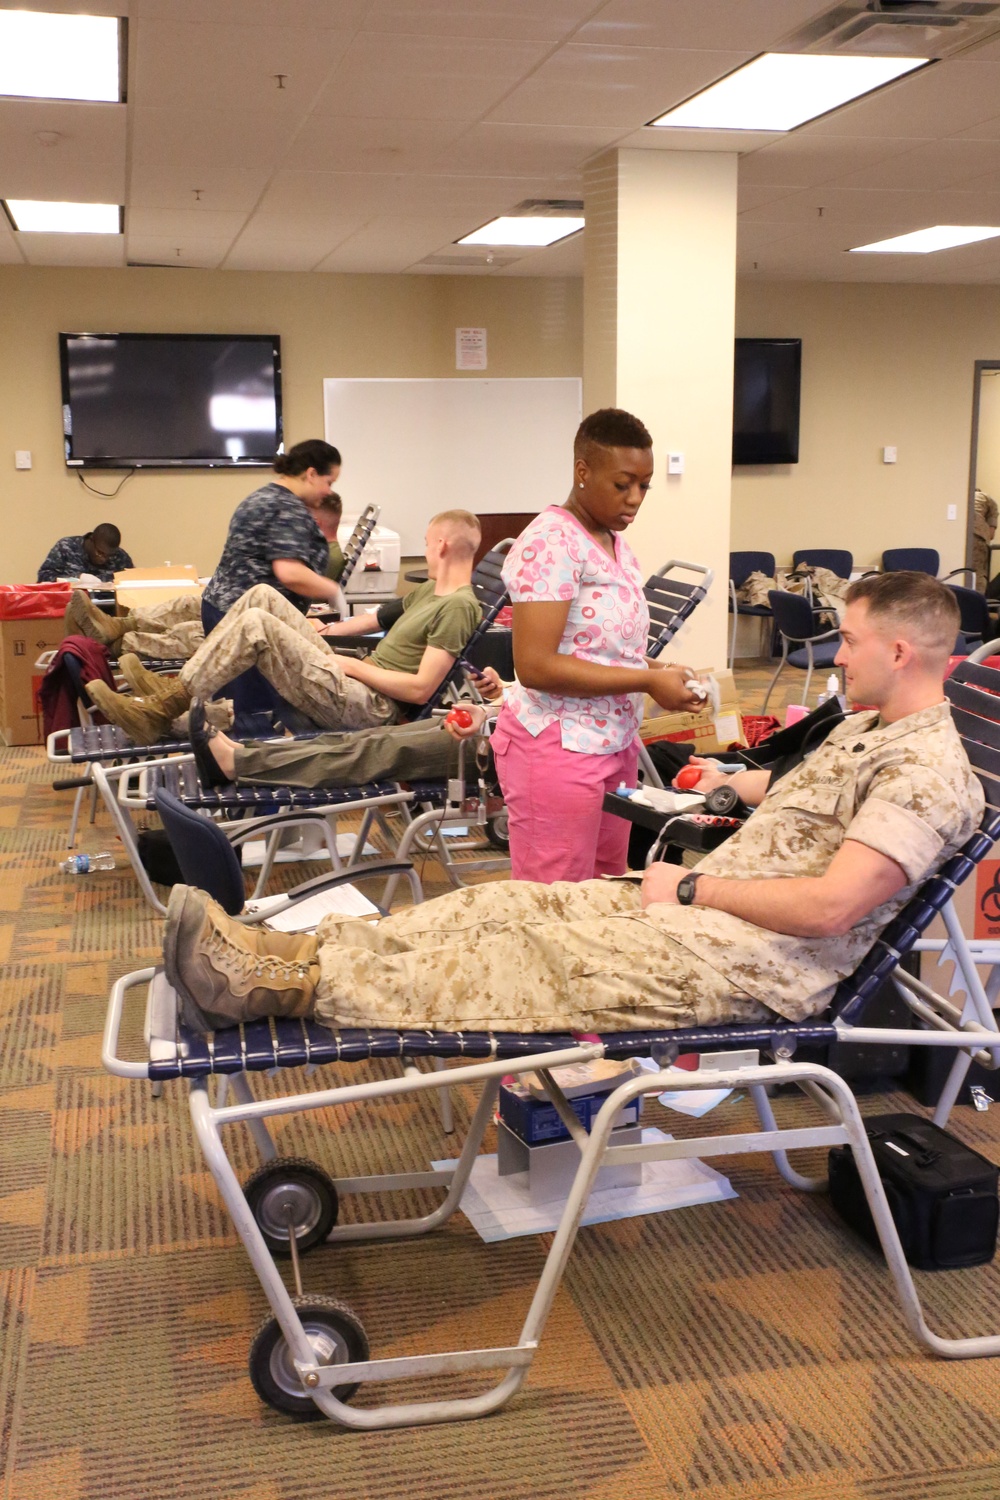 97 units of blood to help fellow service members